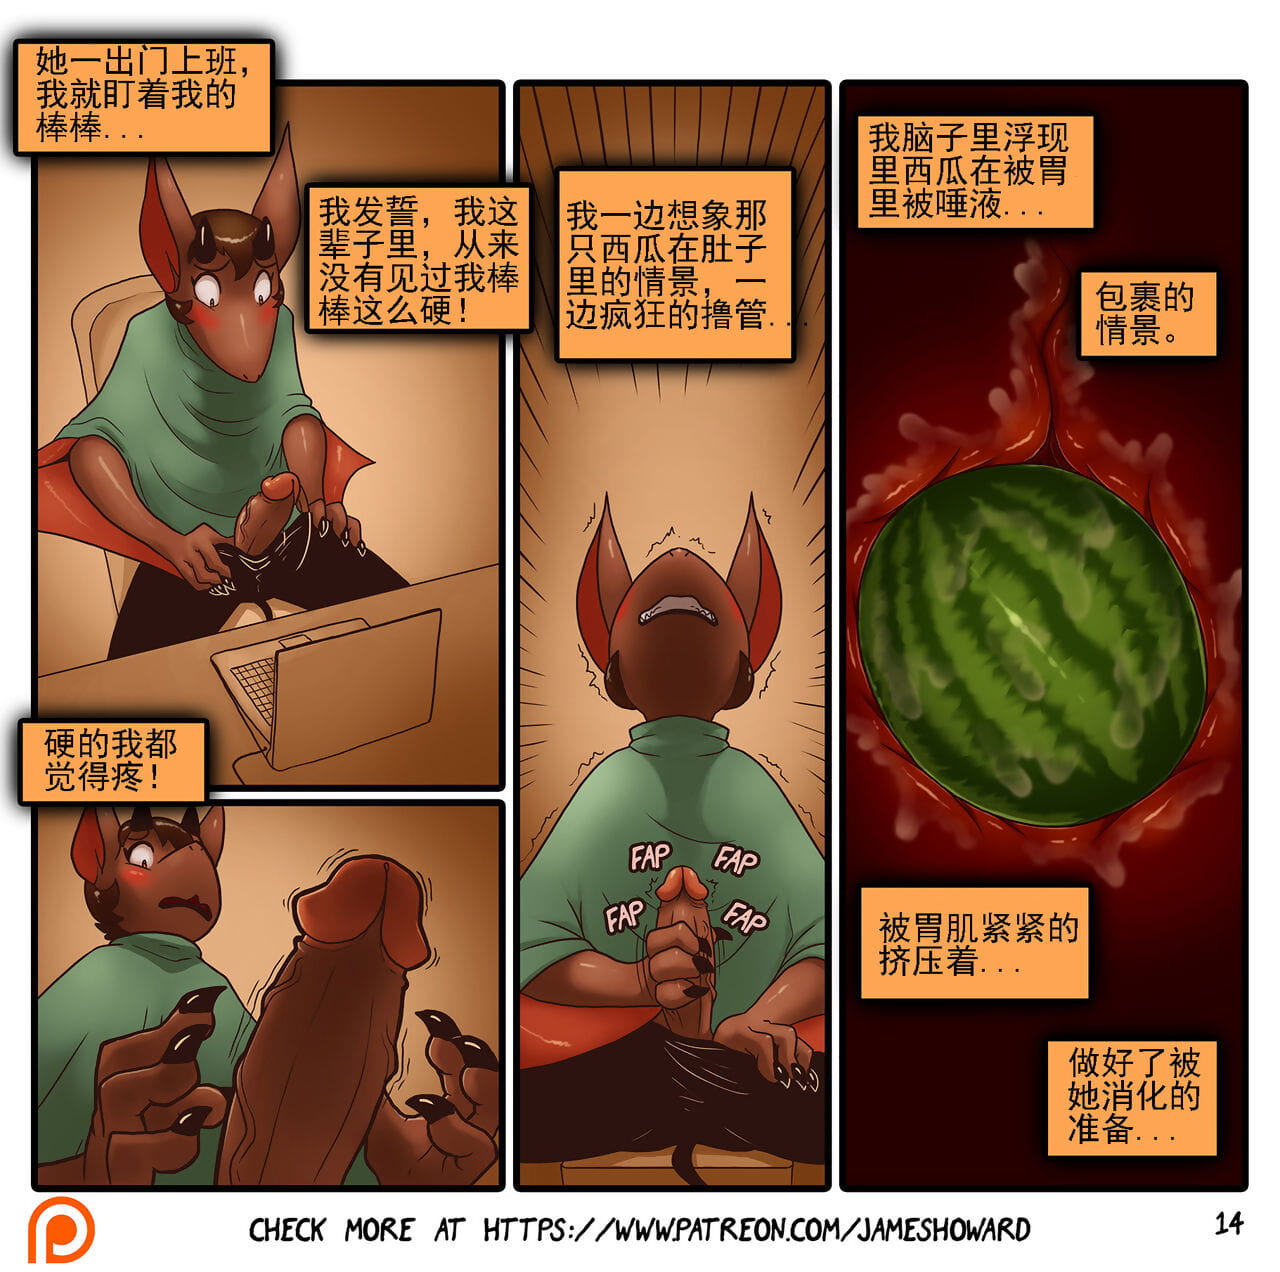 James Howard Vore Story Ch. 1 - The Watermelon Chinese 简体